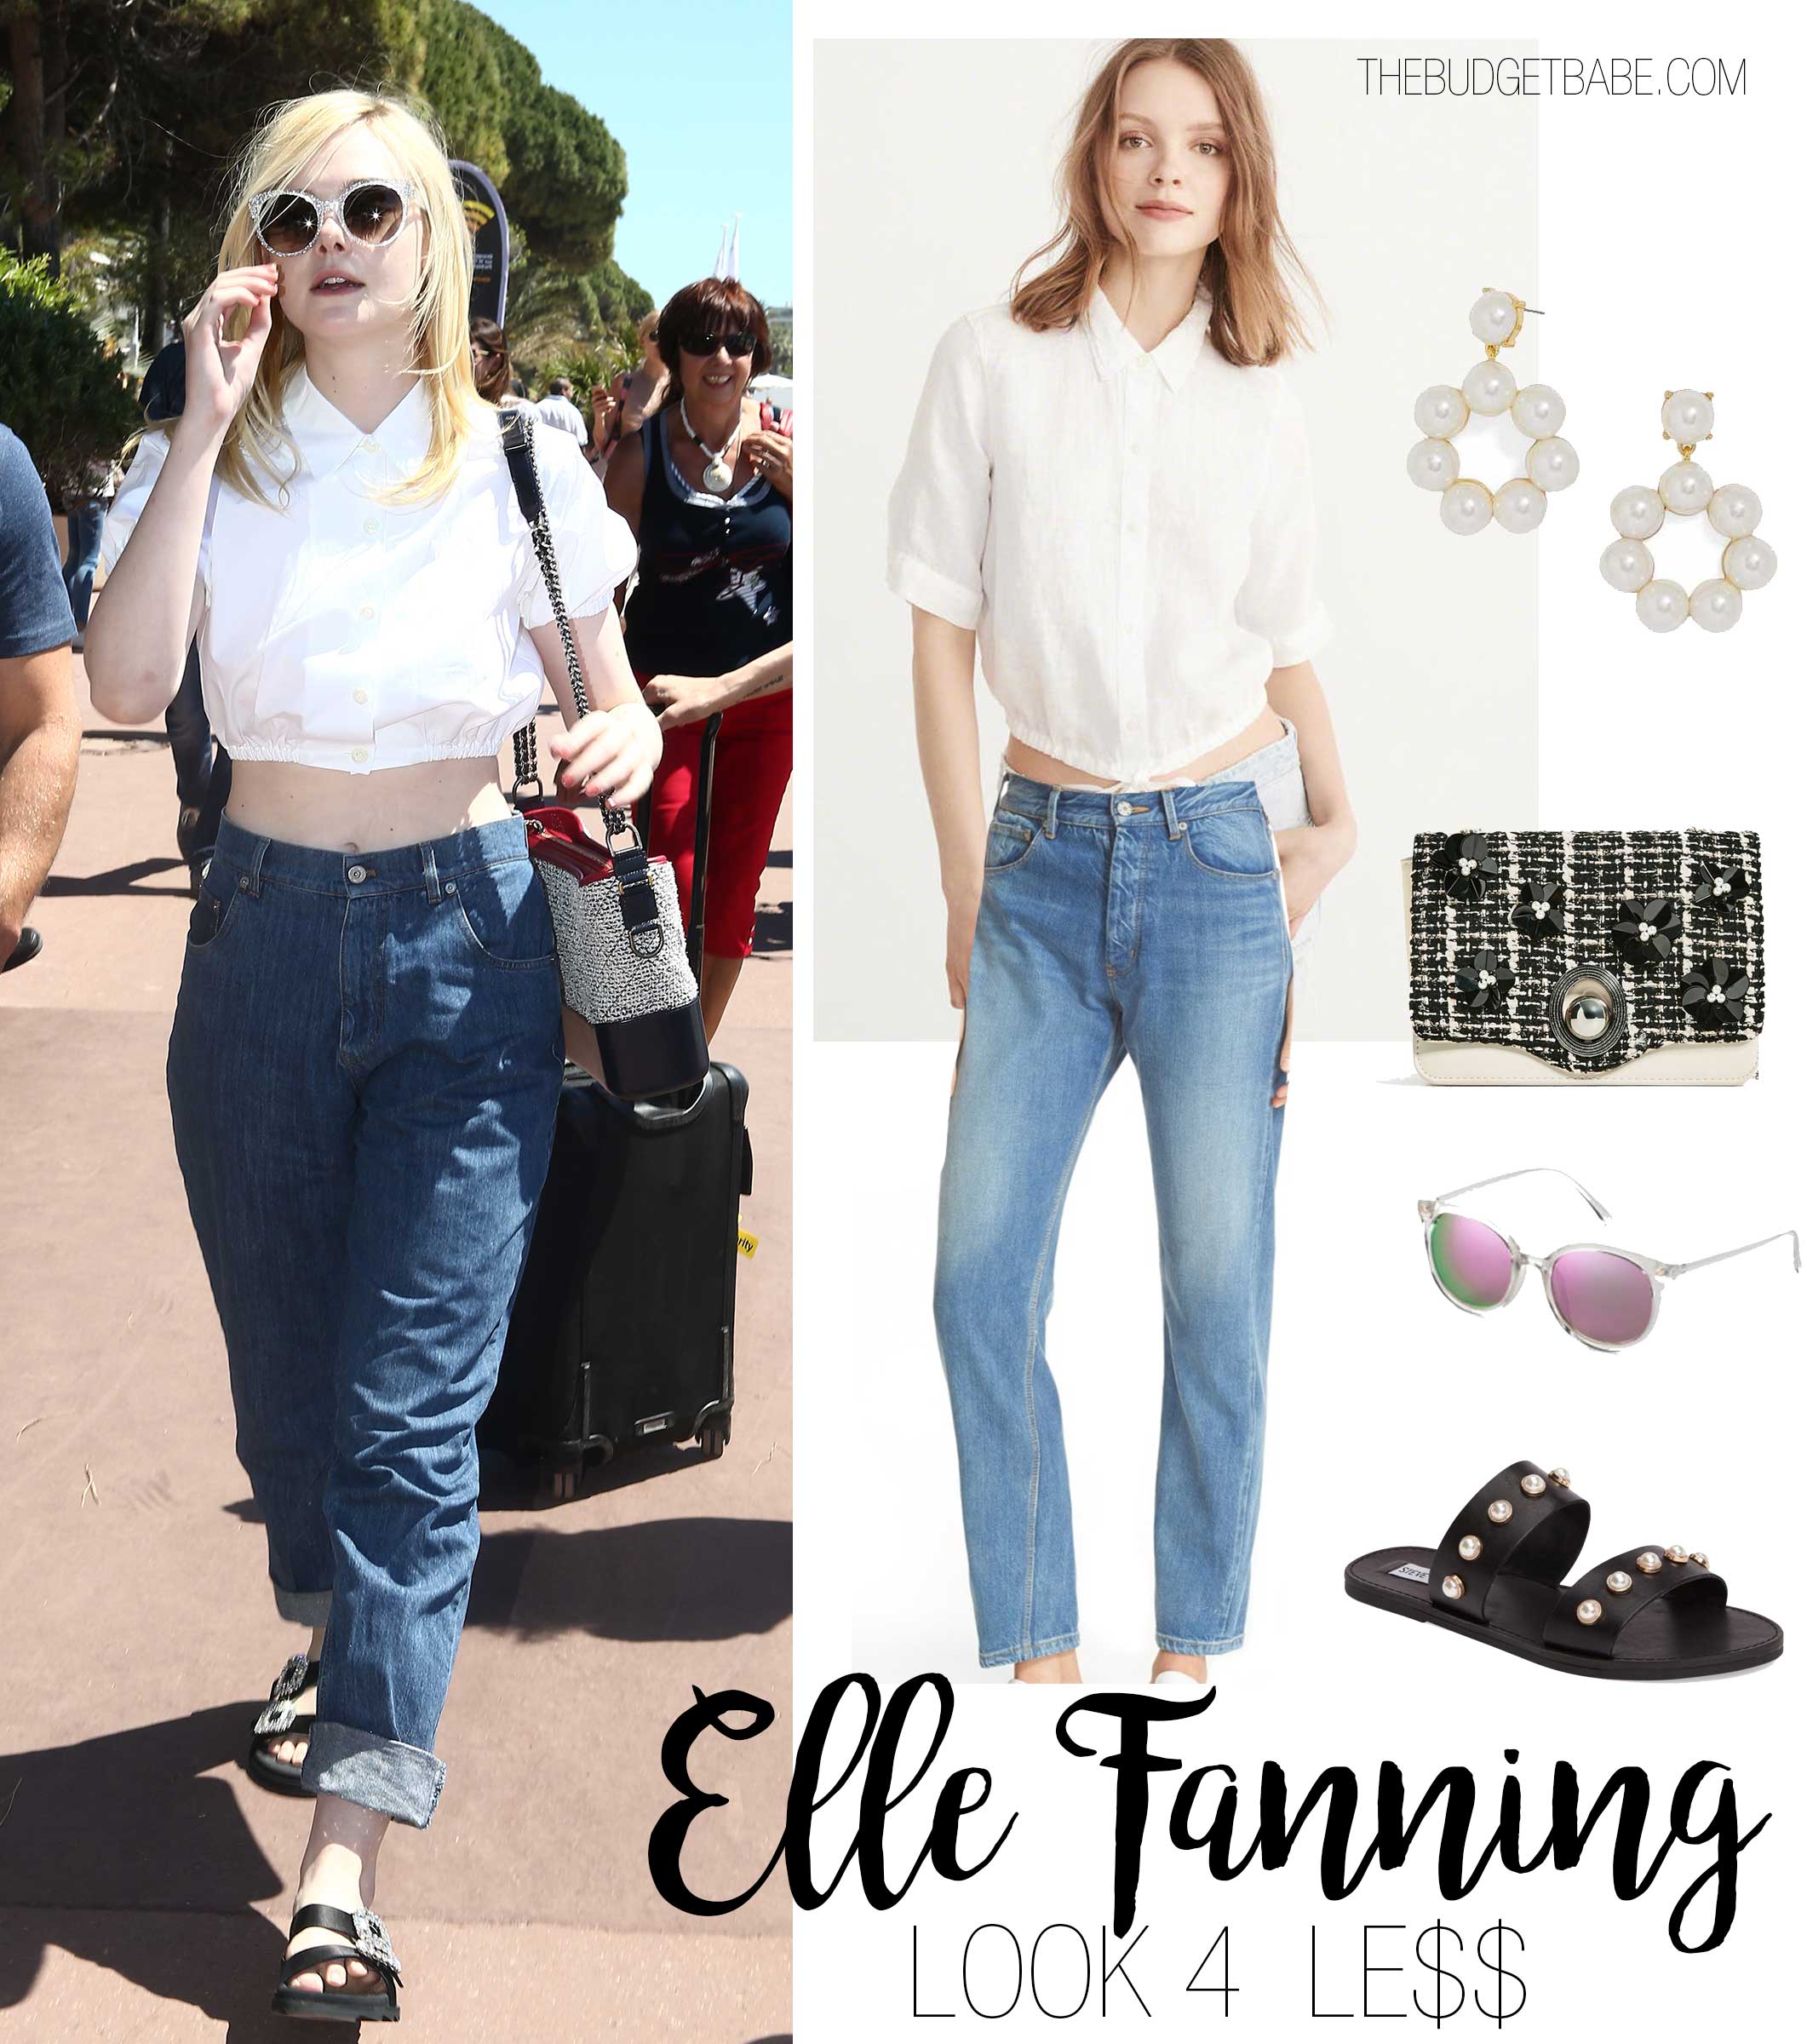 Elle Fanning look for less